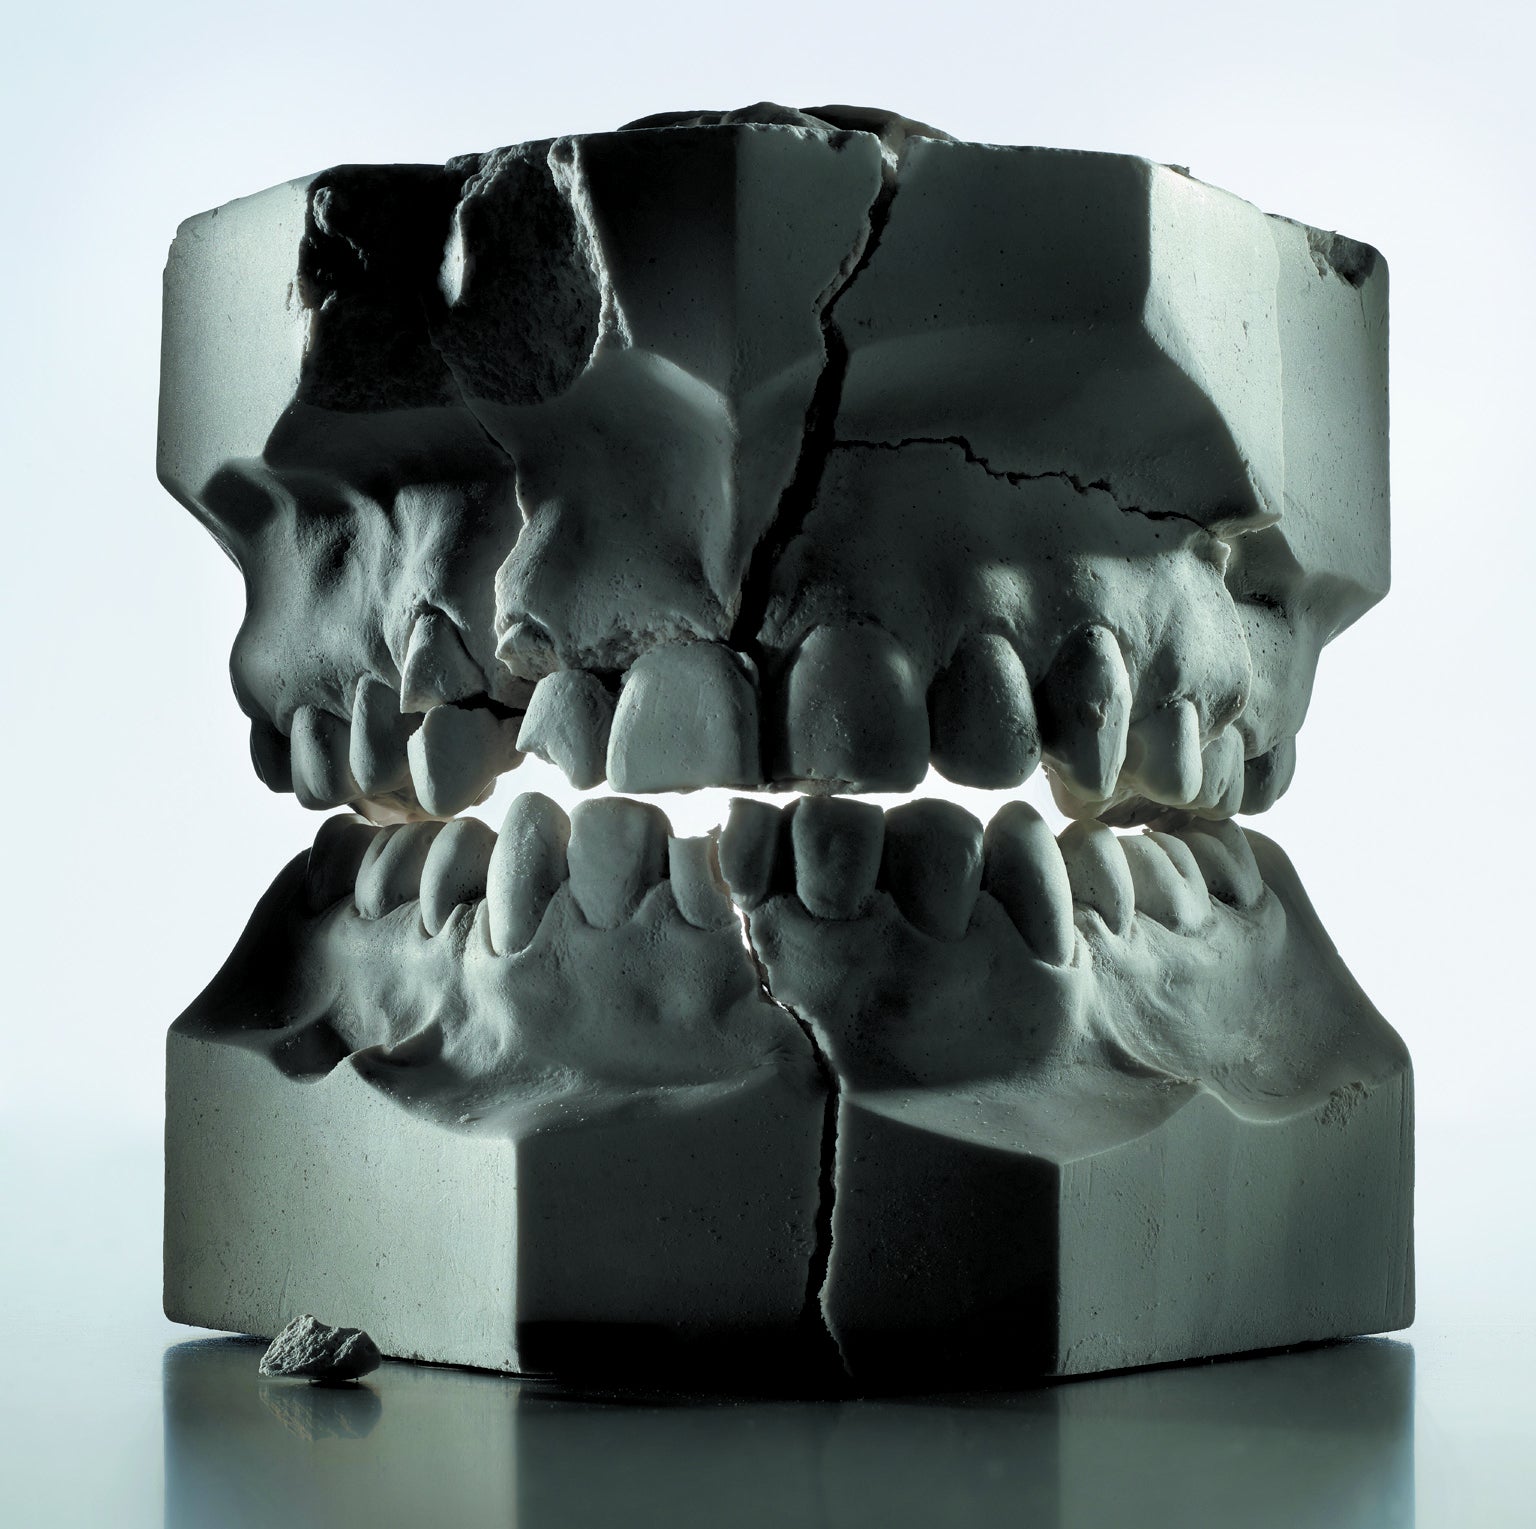 Why We Have So Many Problems with Our Teeth - Scientific American